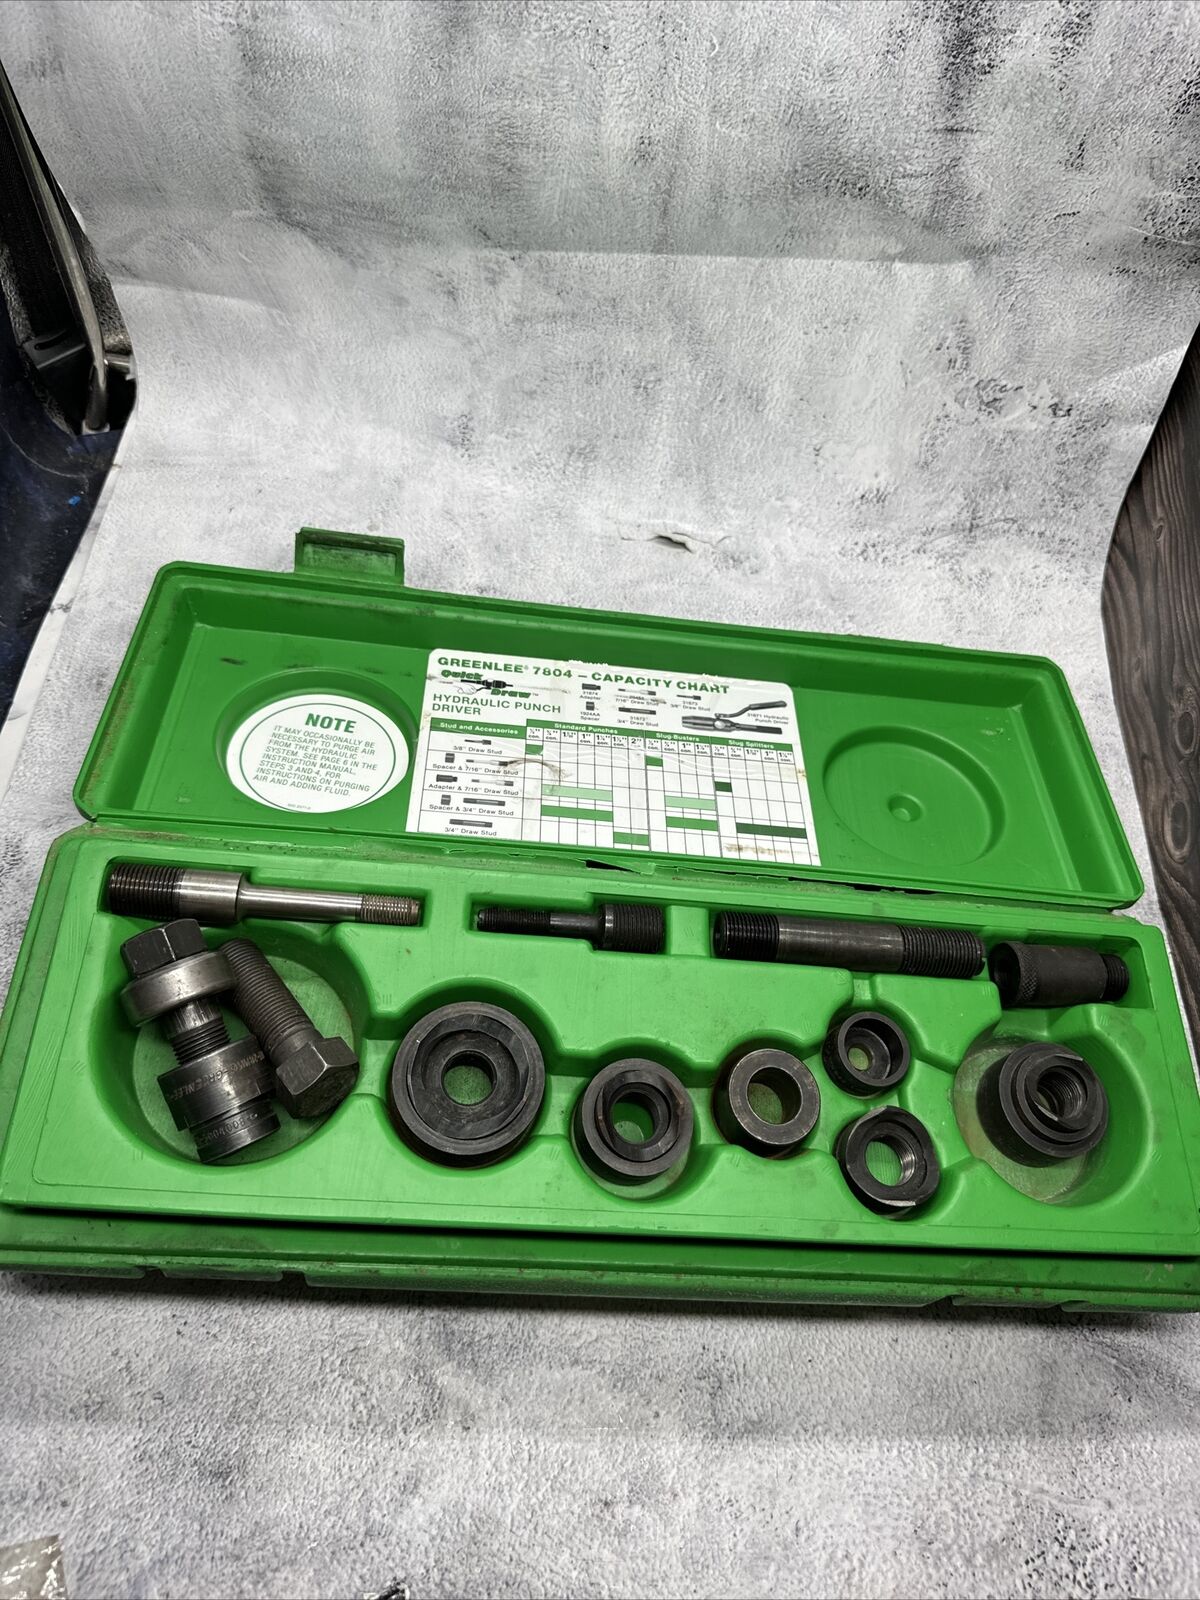 Greenlee 7804 Hydraulic Punch Driver Set W/ Spacers Adapters & Draw Studs